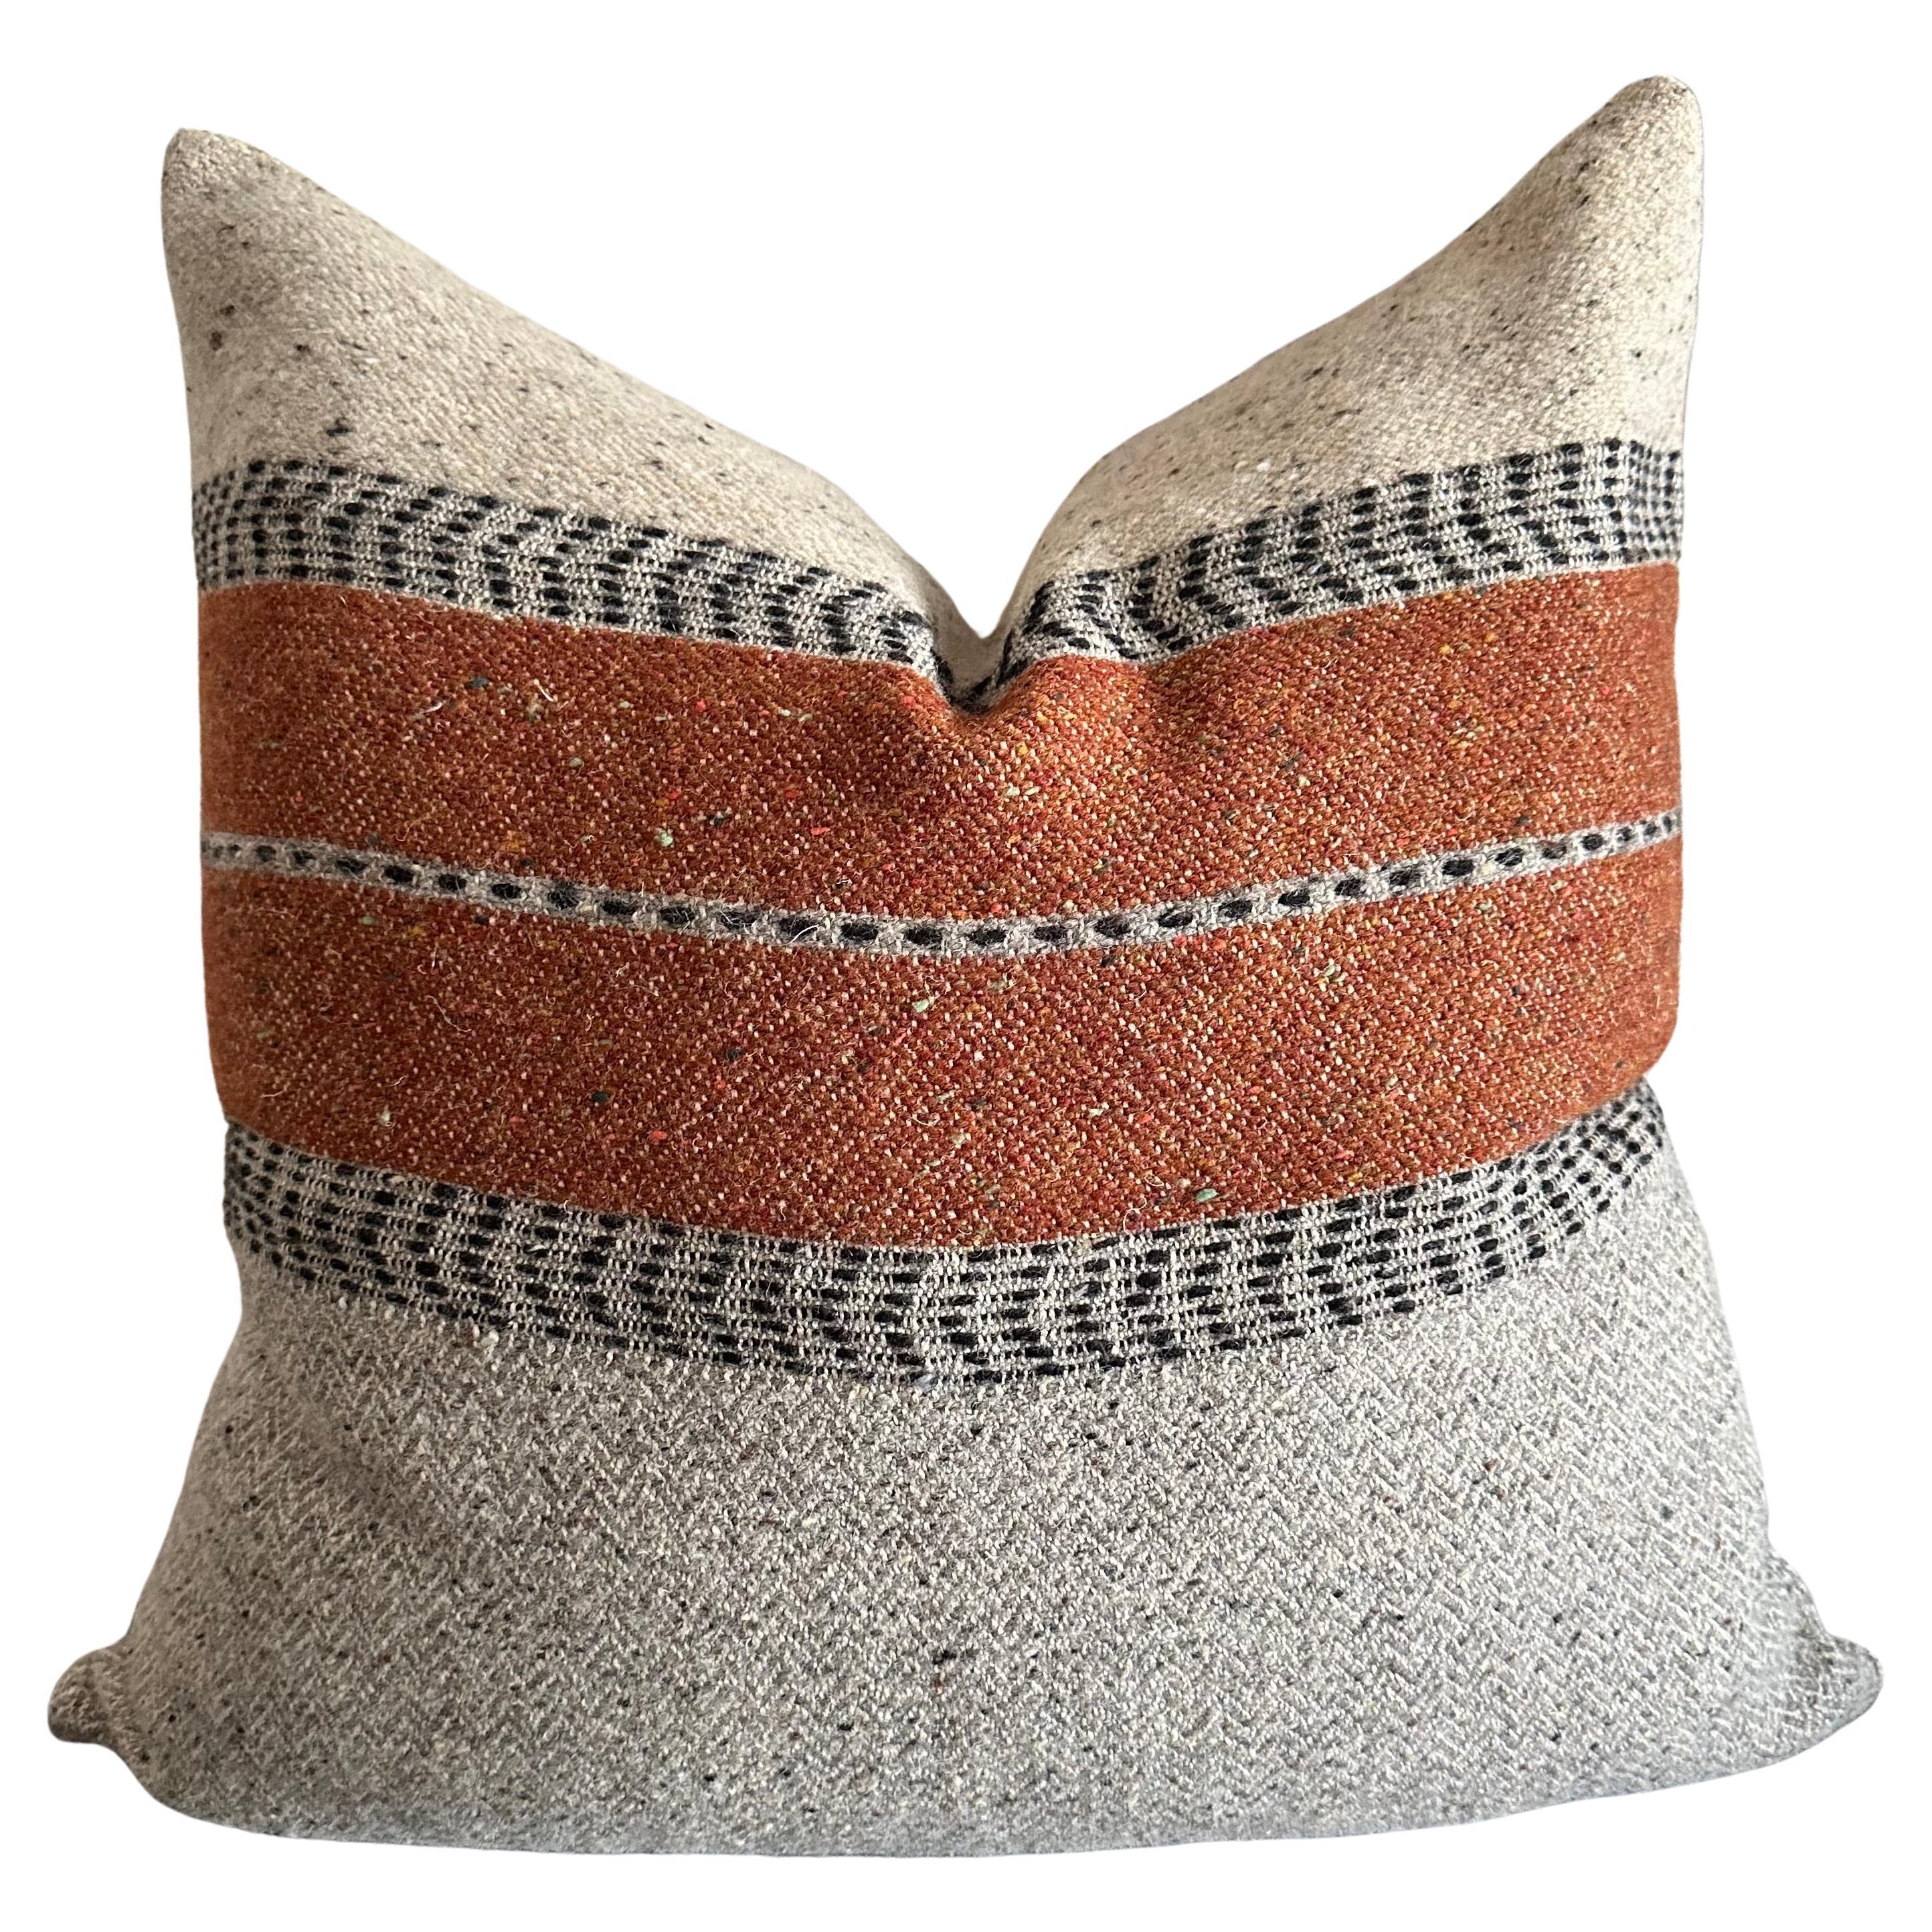 https://a.1stdibscdn.com/montana-linen-and-wool-pillow-with-down-feather-insert-for-sale/f_18223/f_362387021695161916190/f_36238702_1695161917984_bg_processed.jpg